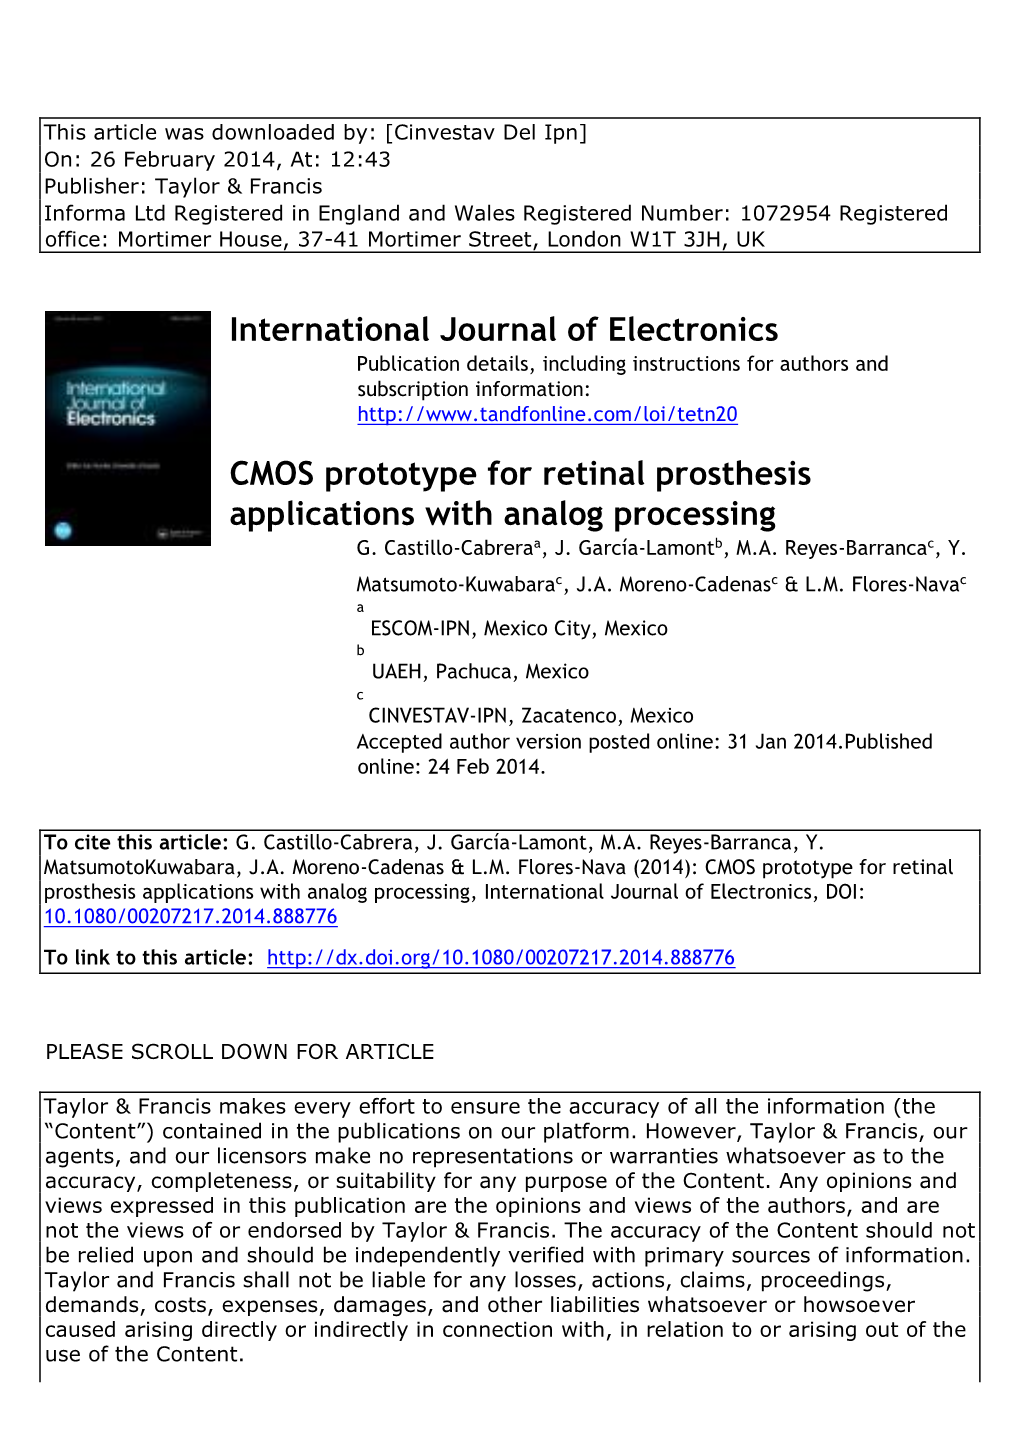 CMOS Prototype for Retinal Prosthesis Applications with Analog Processing G